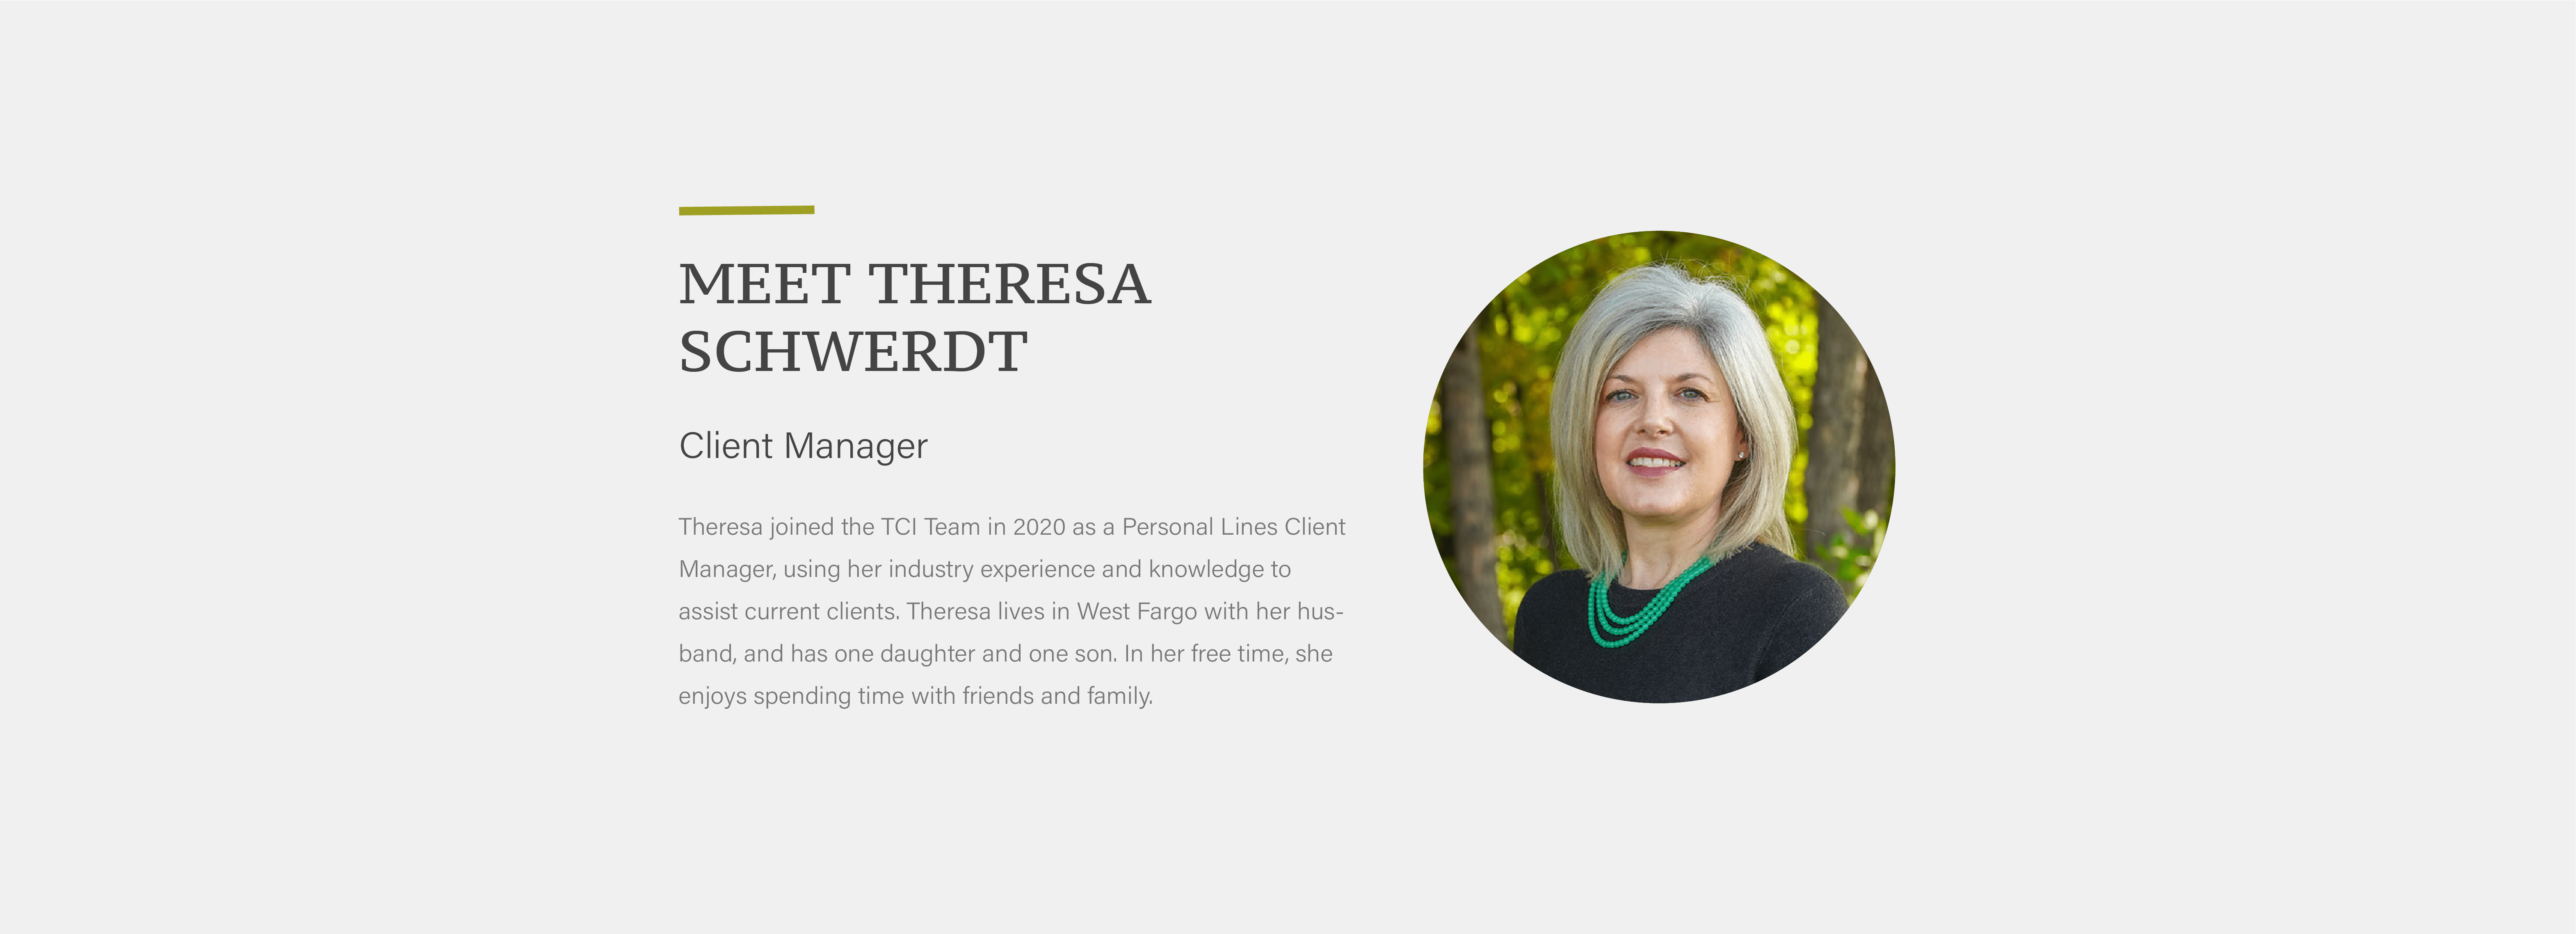 Theresa joined the TCI Team in 2020 as a Personal Lines Client Manager, using her industry experience and knowledge to assist current clients. Theresa lives in West Fargo with her husband, and has one daughter and one son. In her free time, she enjoys spending time with friends and family.